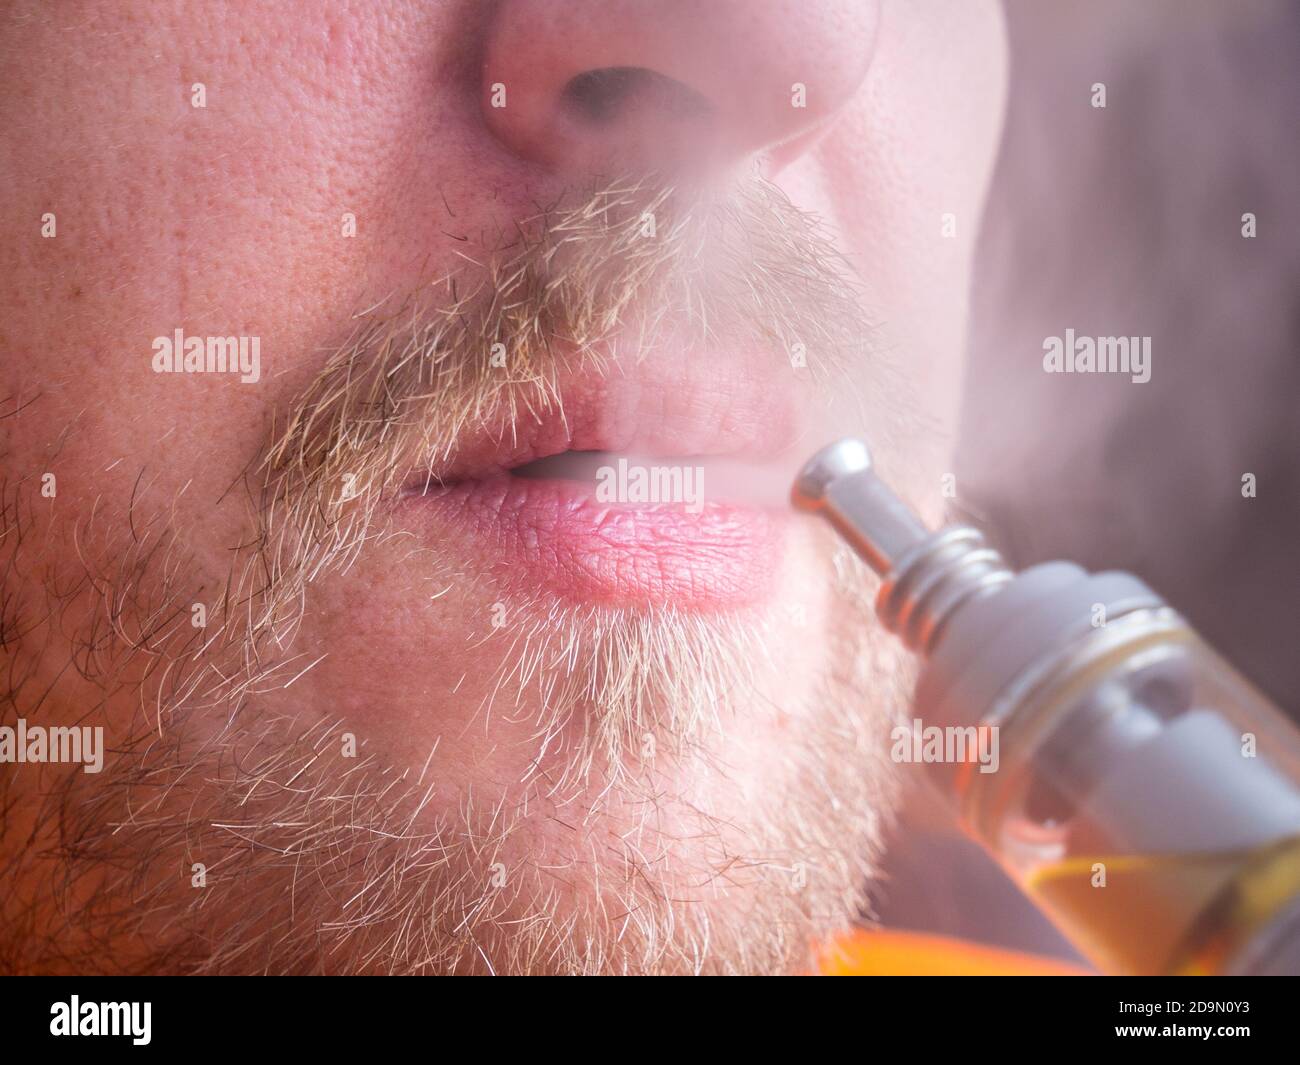 Close-up of mouth with mustache using electronic cigarette and exhaling vapor Stock Photo